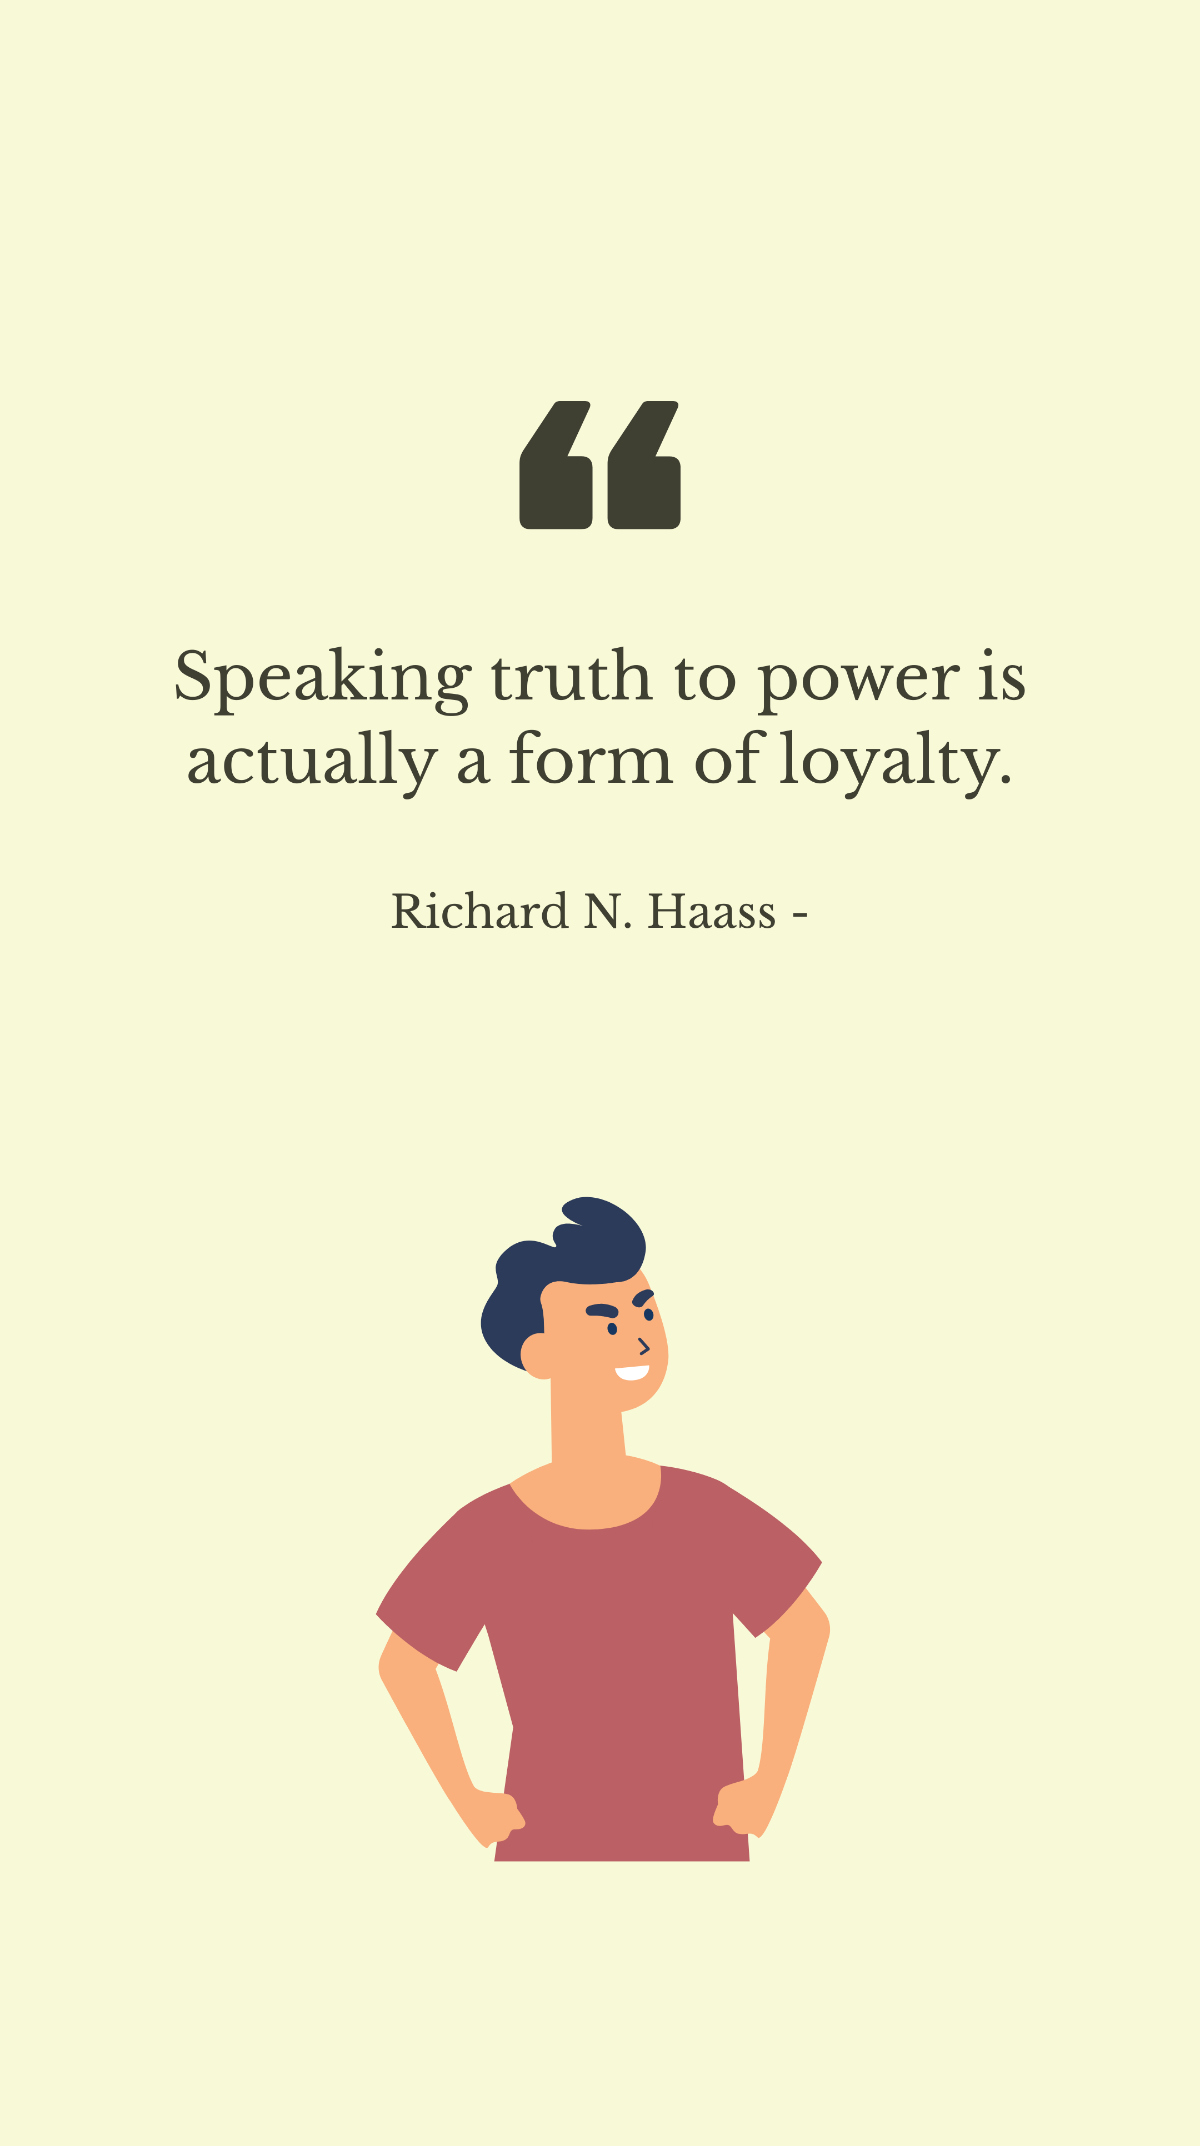 Richard N. Haass - Speaking truth to power is actually a form of loyalty. Template